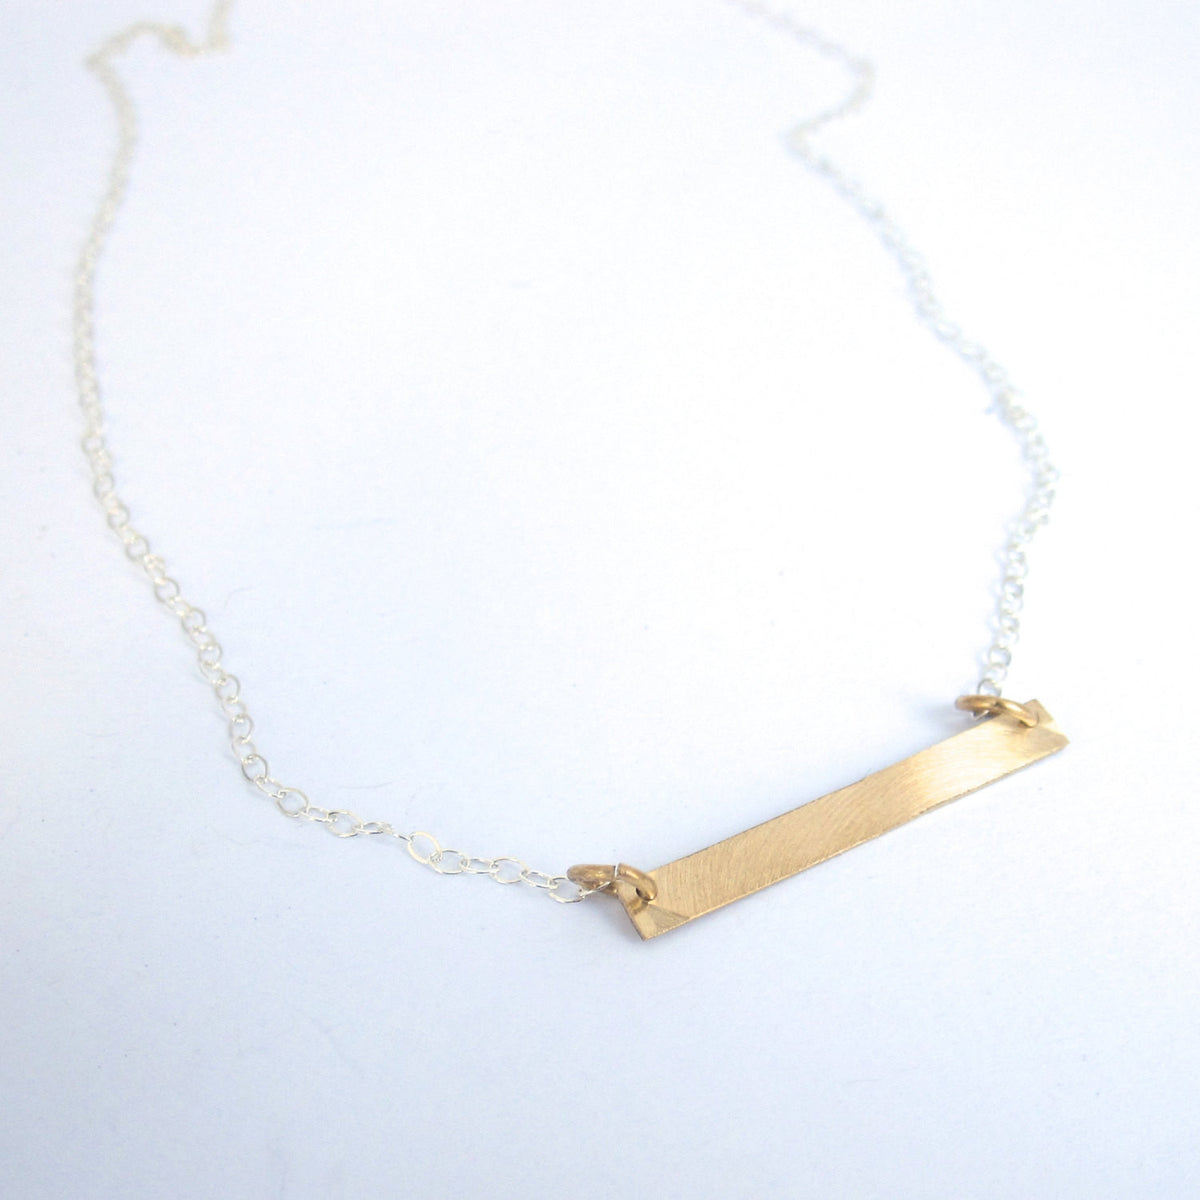 Hand-Made Modern Styled Sterling Silver or Brass Flat Bar W/ Sterling Silver Chain Necklace - 0137 - Virginia Wynne Designs